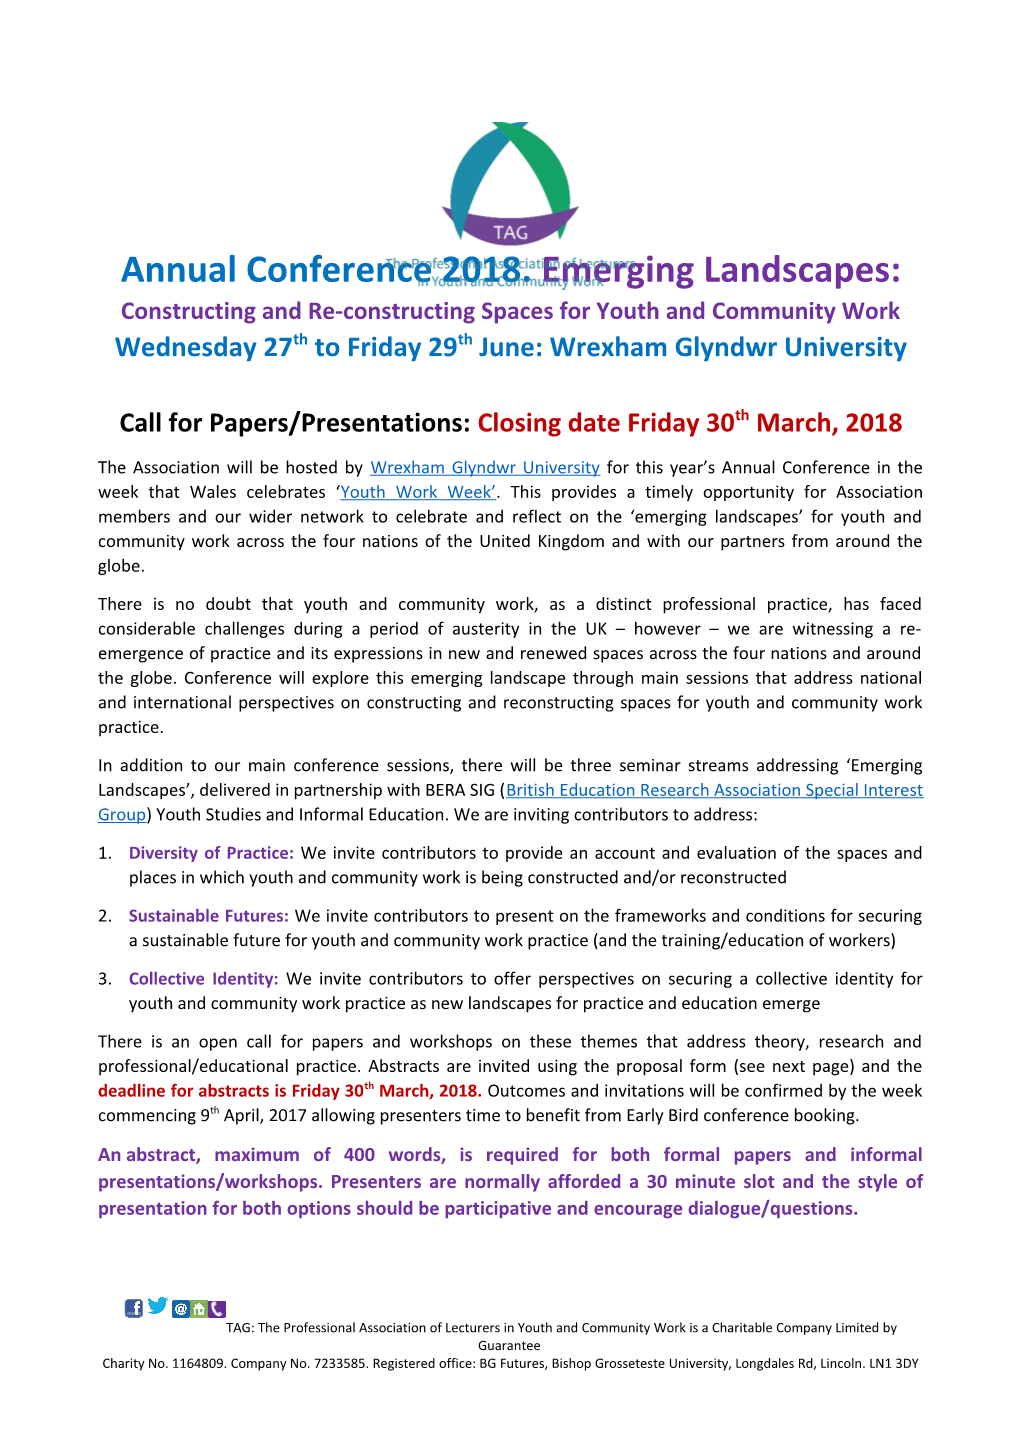 Call for Papers/Presentations: Closing Date Friday30thmarch, 2018